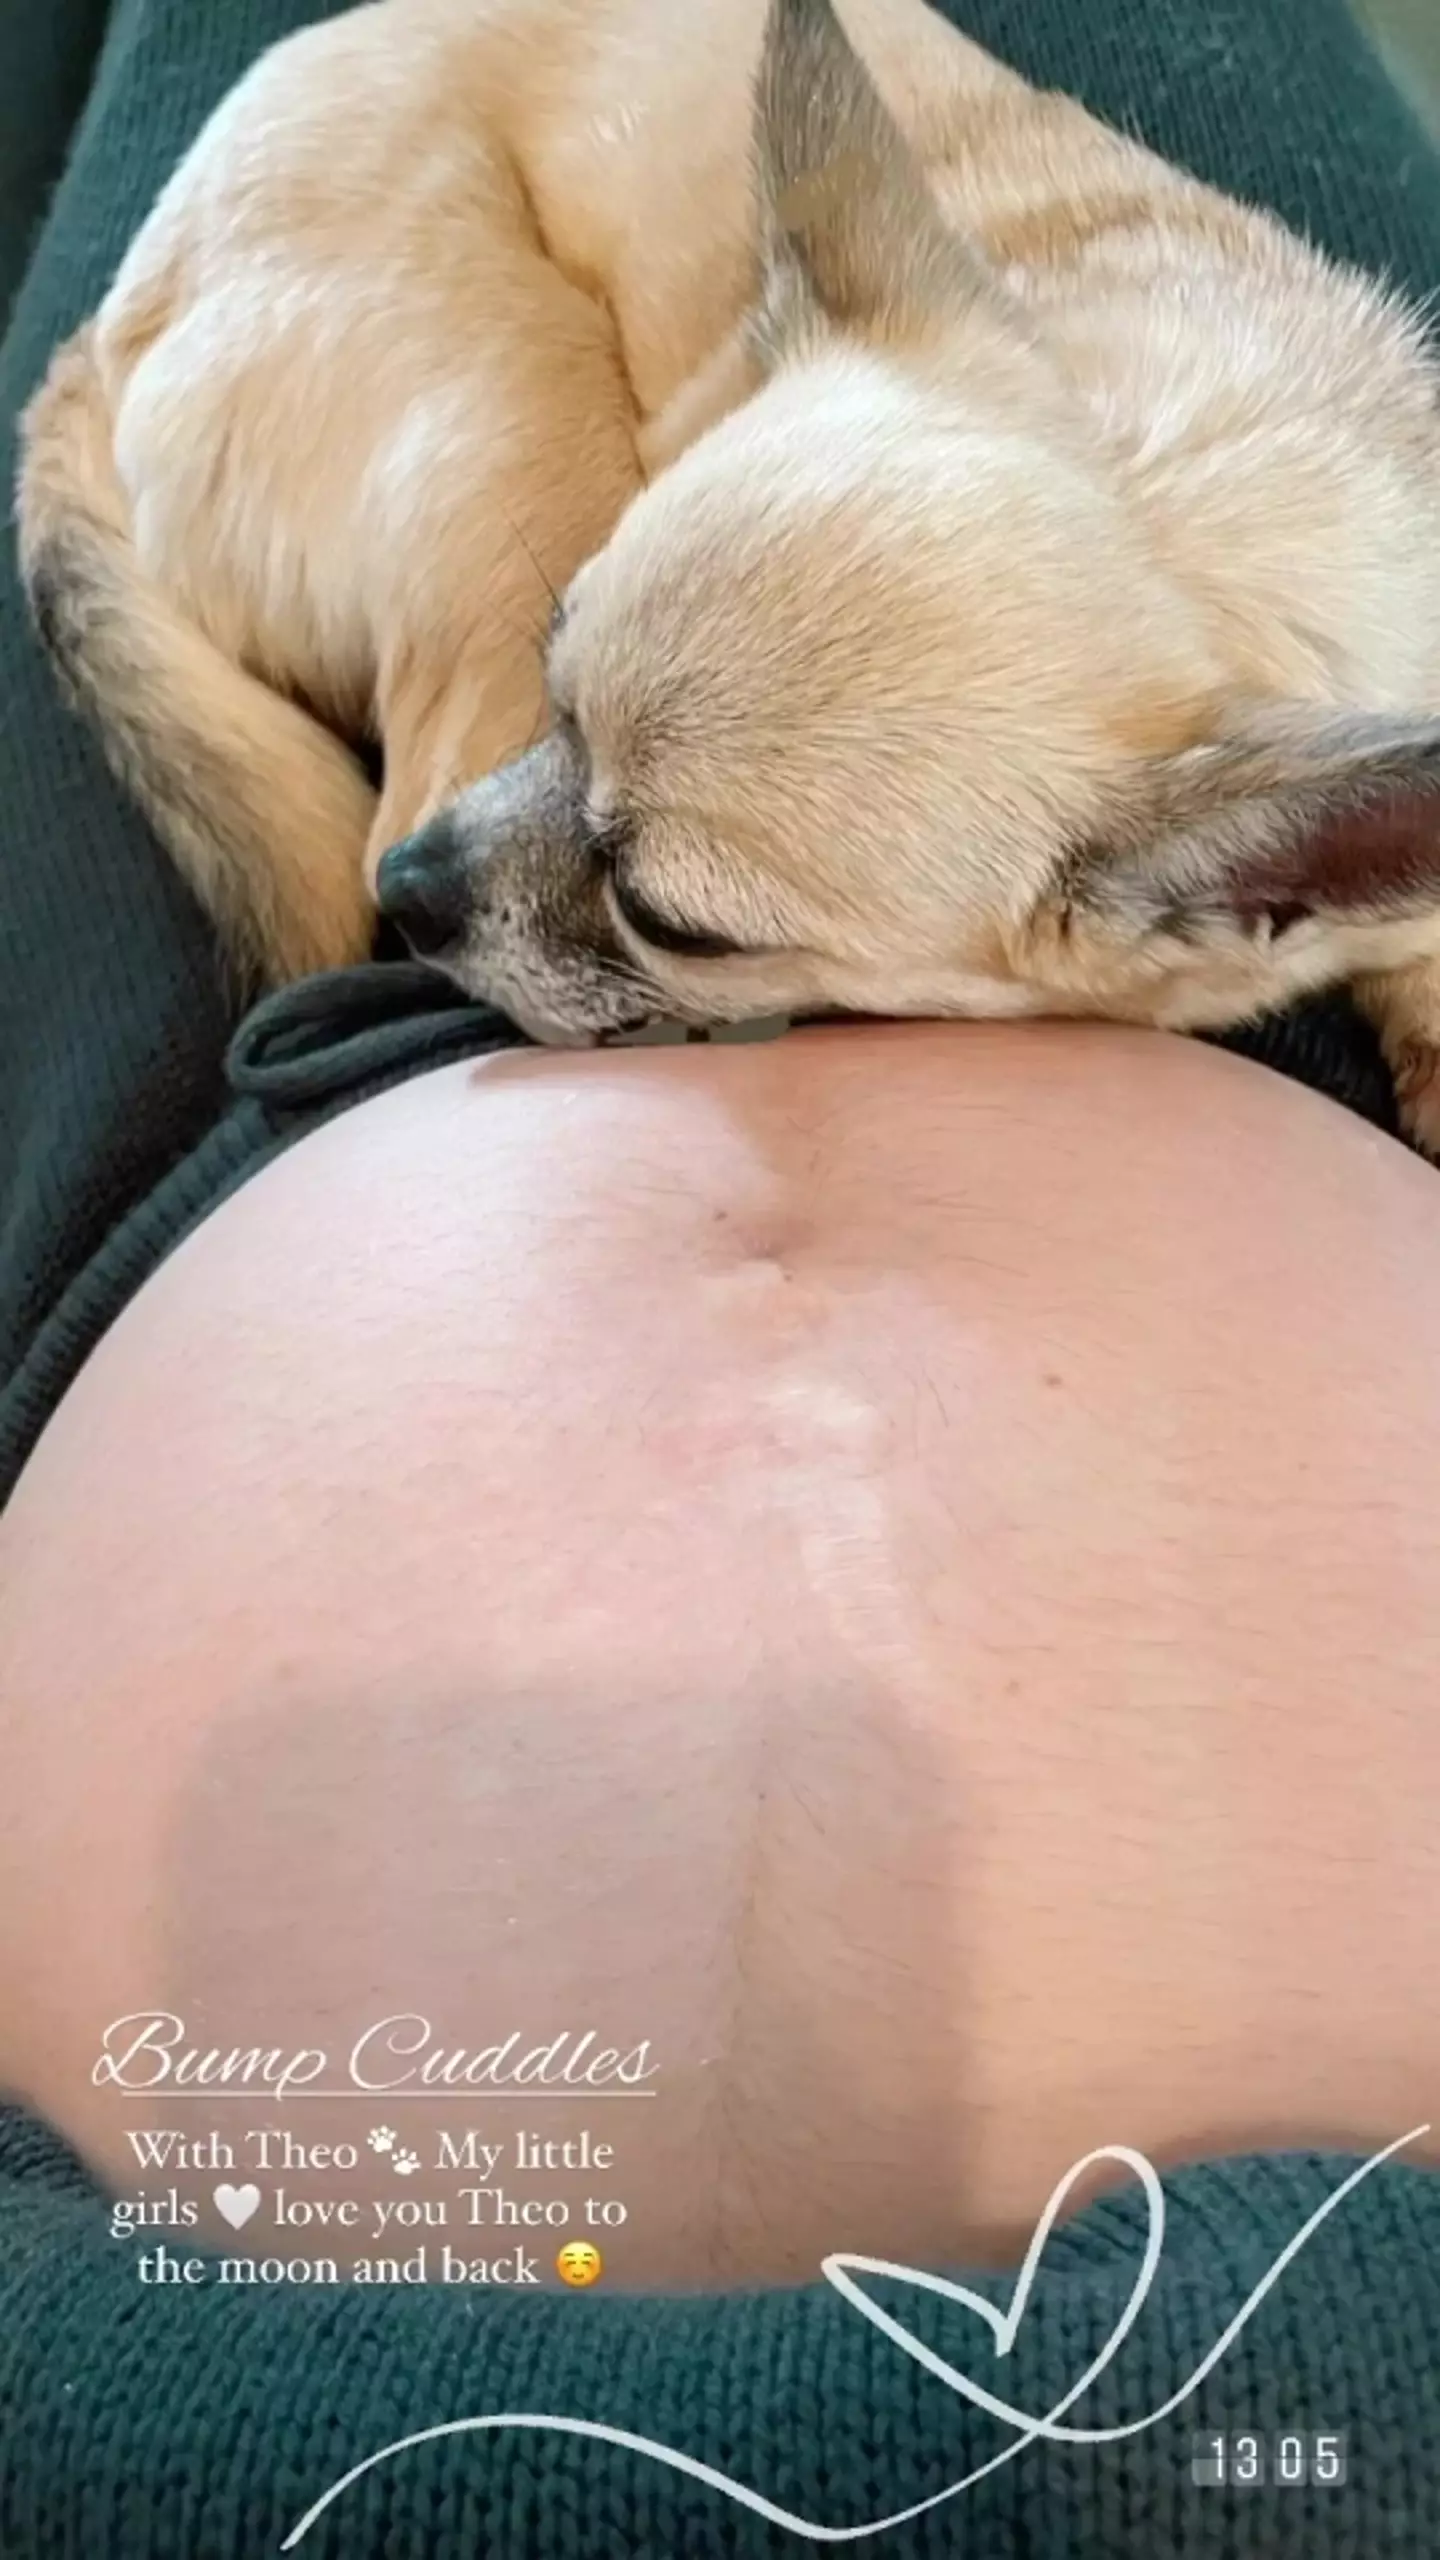 Stacey had shared a picture of her dog cuddling her bump on instagram (